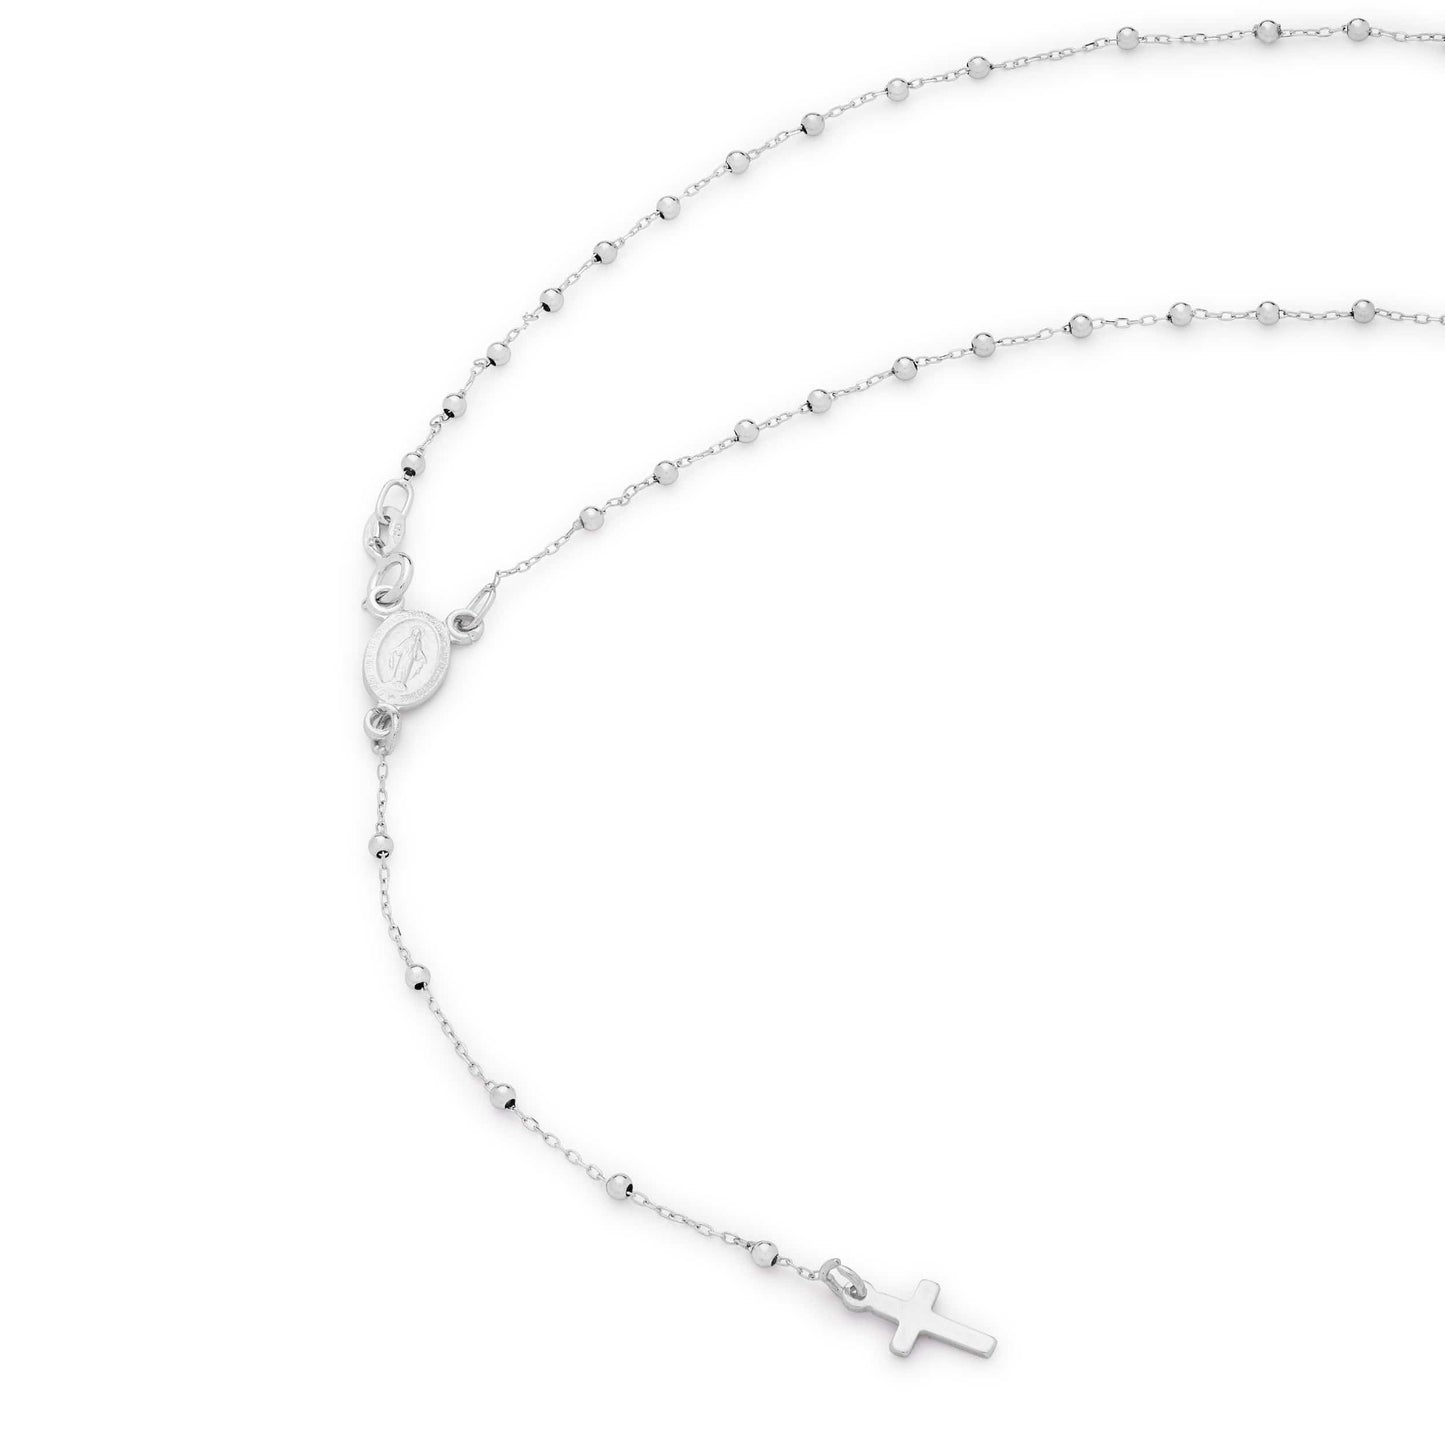 MONDO CATTOLICO Prayer Beads 30.5 cm (12 in) / 1 mm (0.03 in) White Gold Tiny Rosary Beads